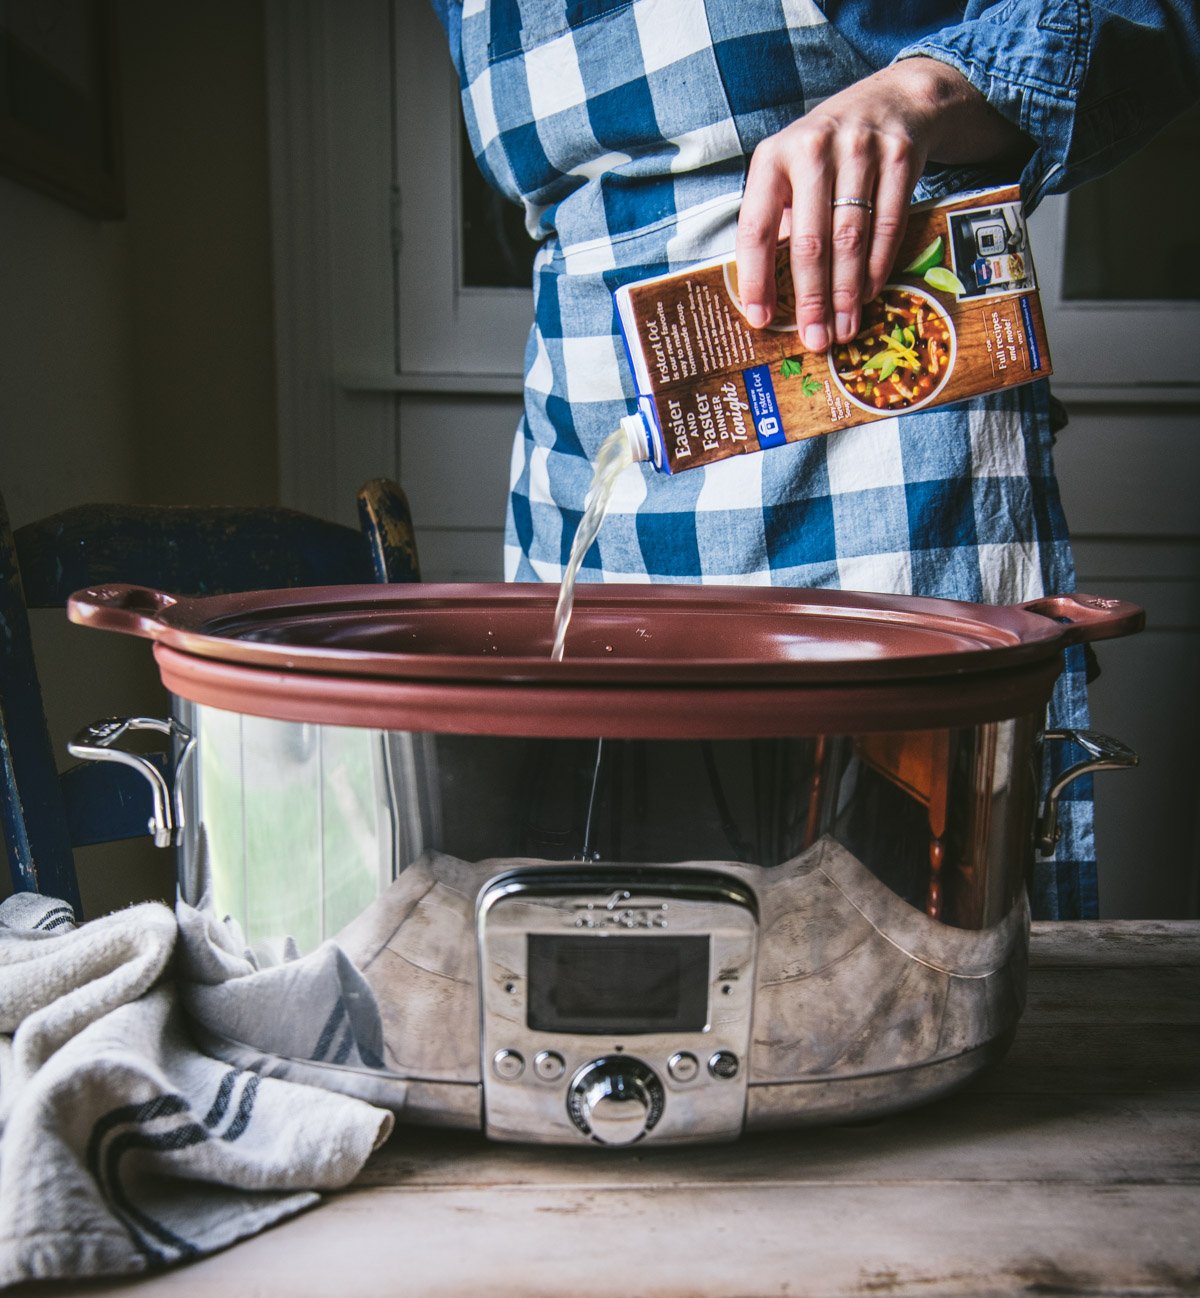 A woman pours a carton of chicken broth into a large crock pot.